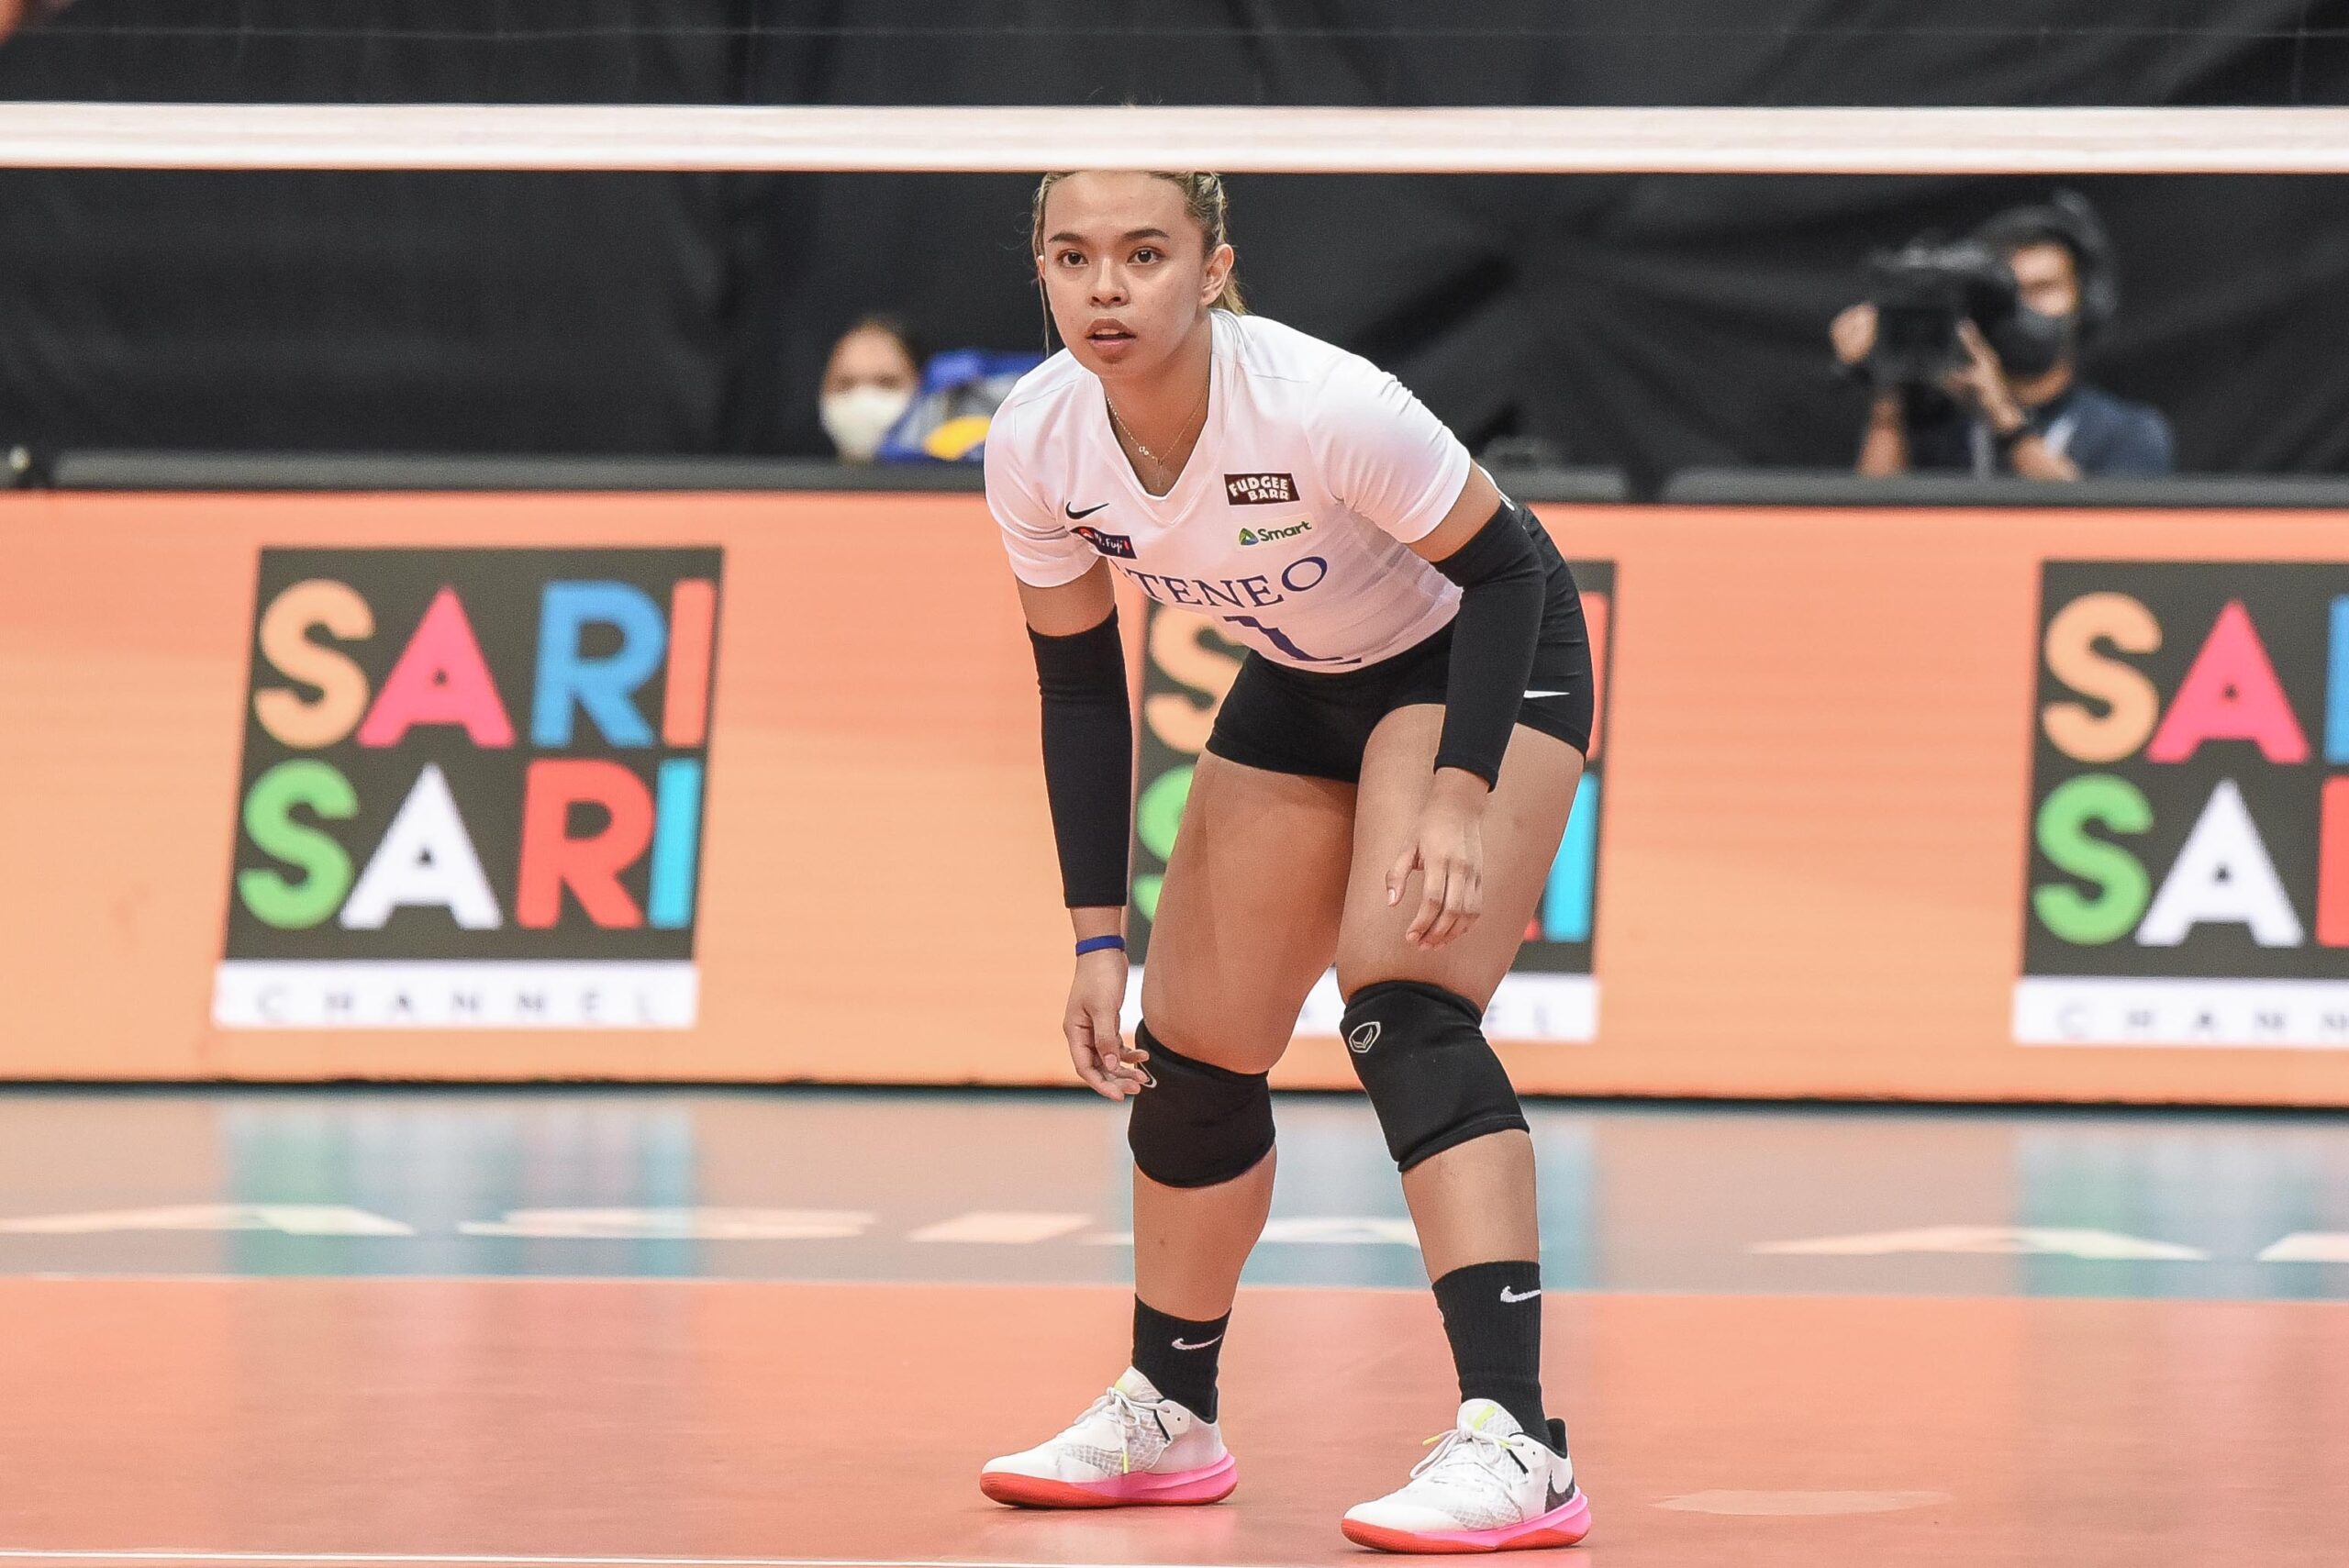 UAAP-Season-84-Womens-Volleyball-UST-vs-Ateneo-Dani-Ravena-1-scaled Almadro hopes improved defense does wonders vs La Salle in do-or-die match ADMU News UAAP Volleyball  - philippine sports news